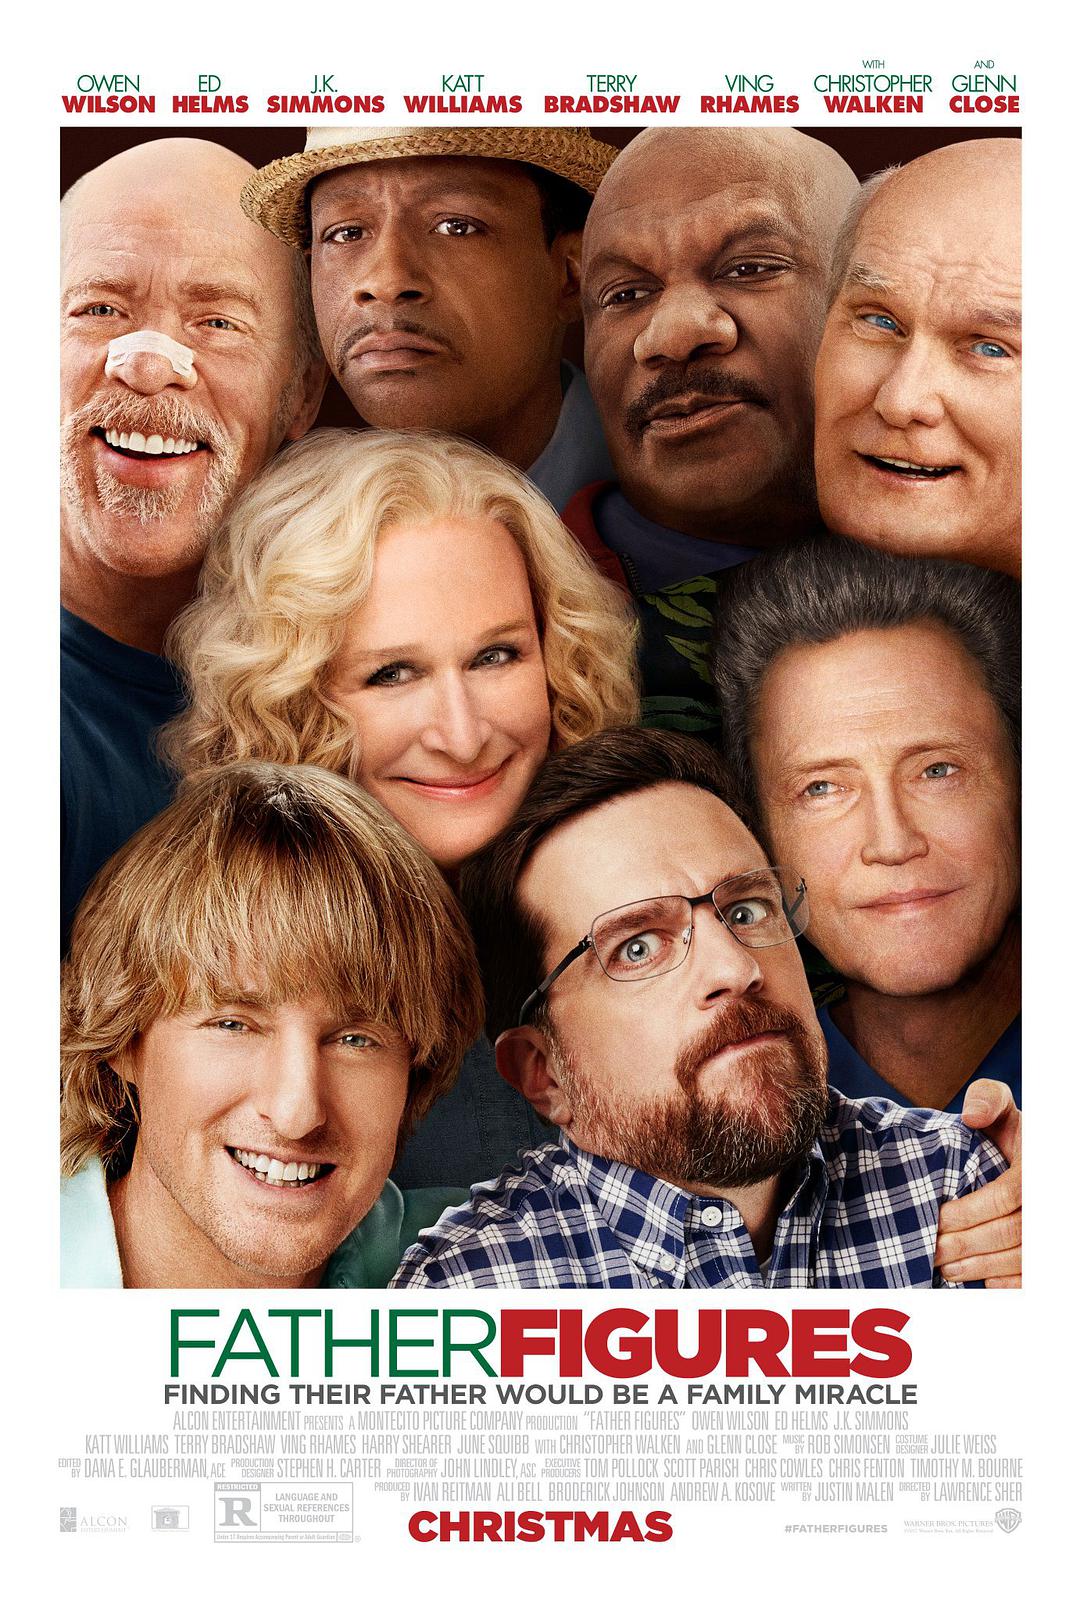  Father.Figures.2017.1080p.BluRay.x264.DTS-HD.MA.5.1-FGT 9.49GB-1.png